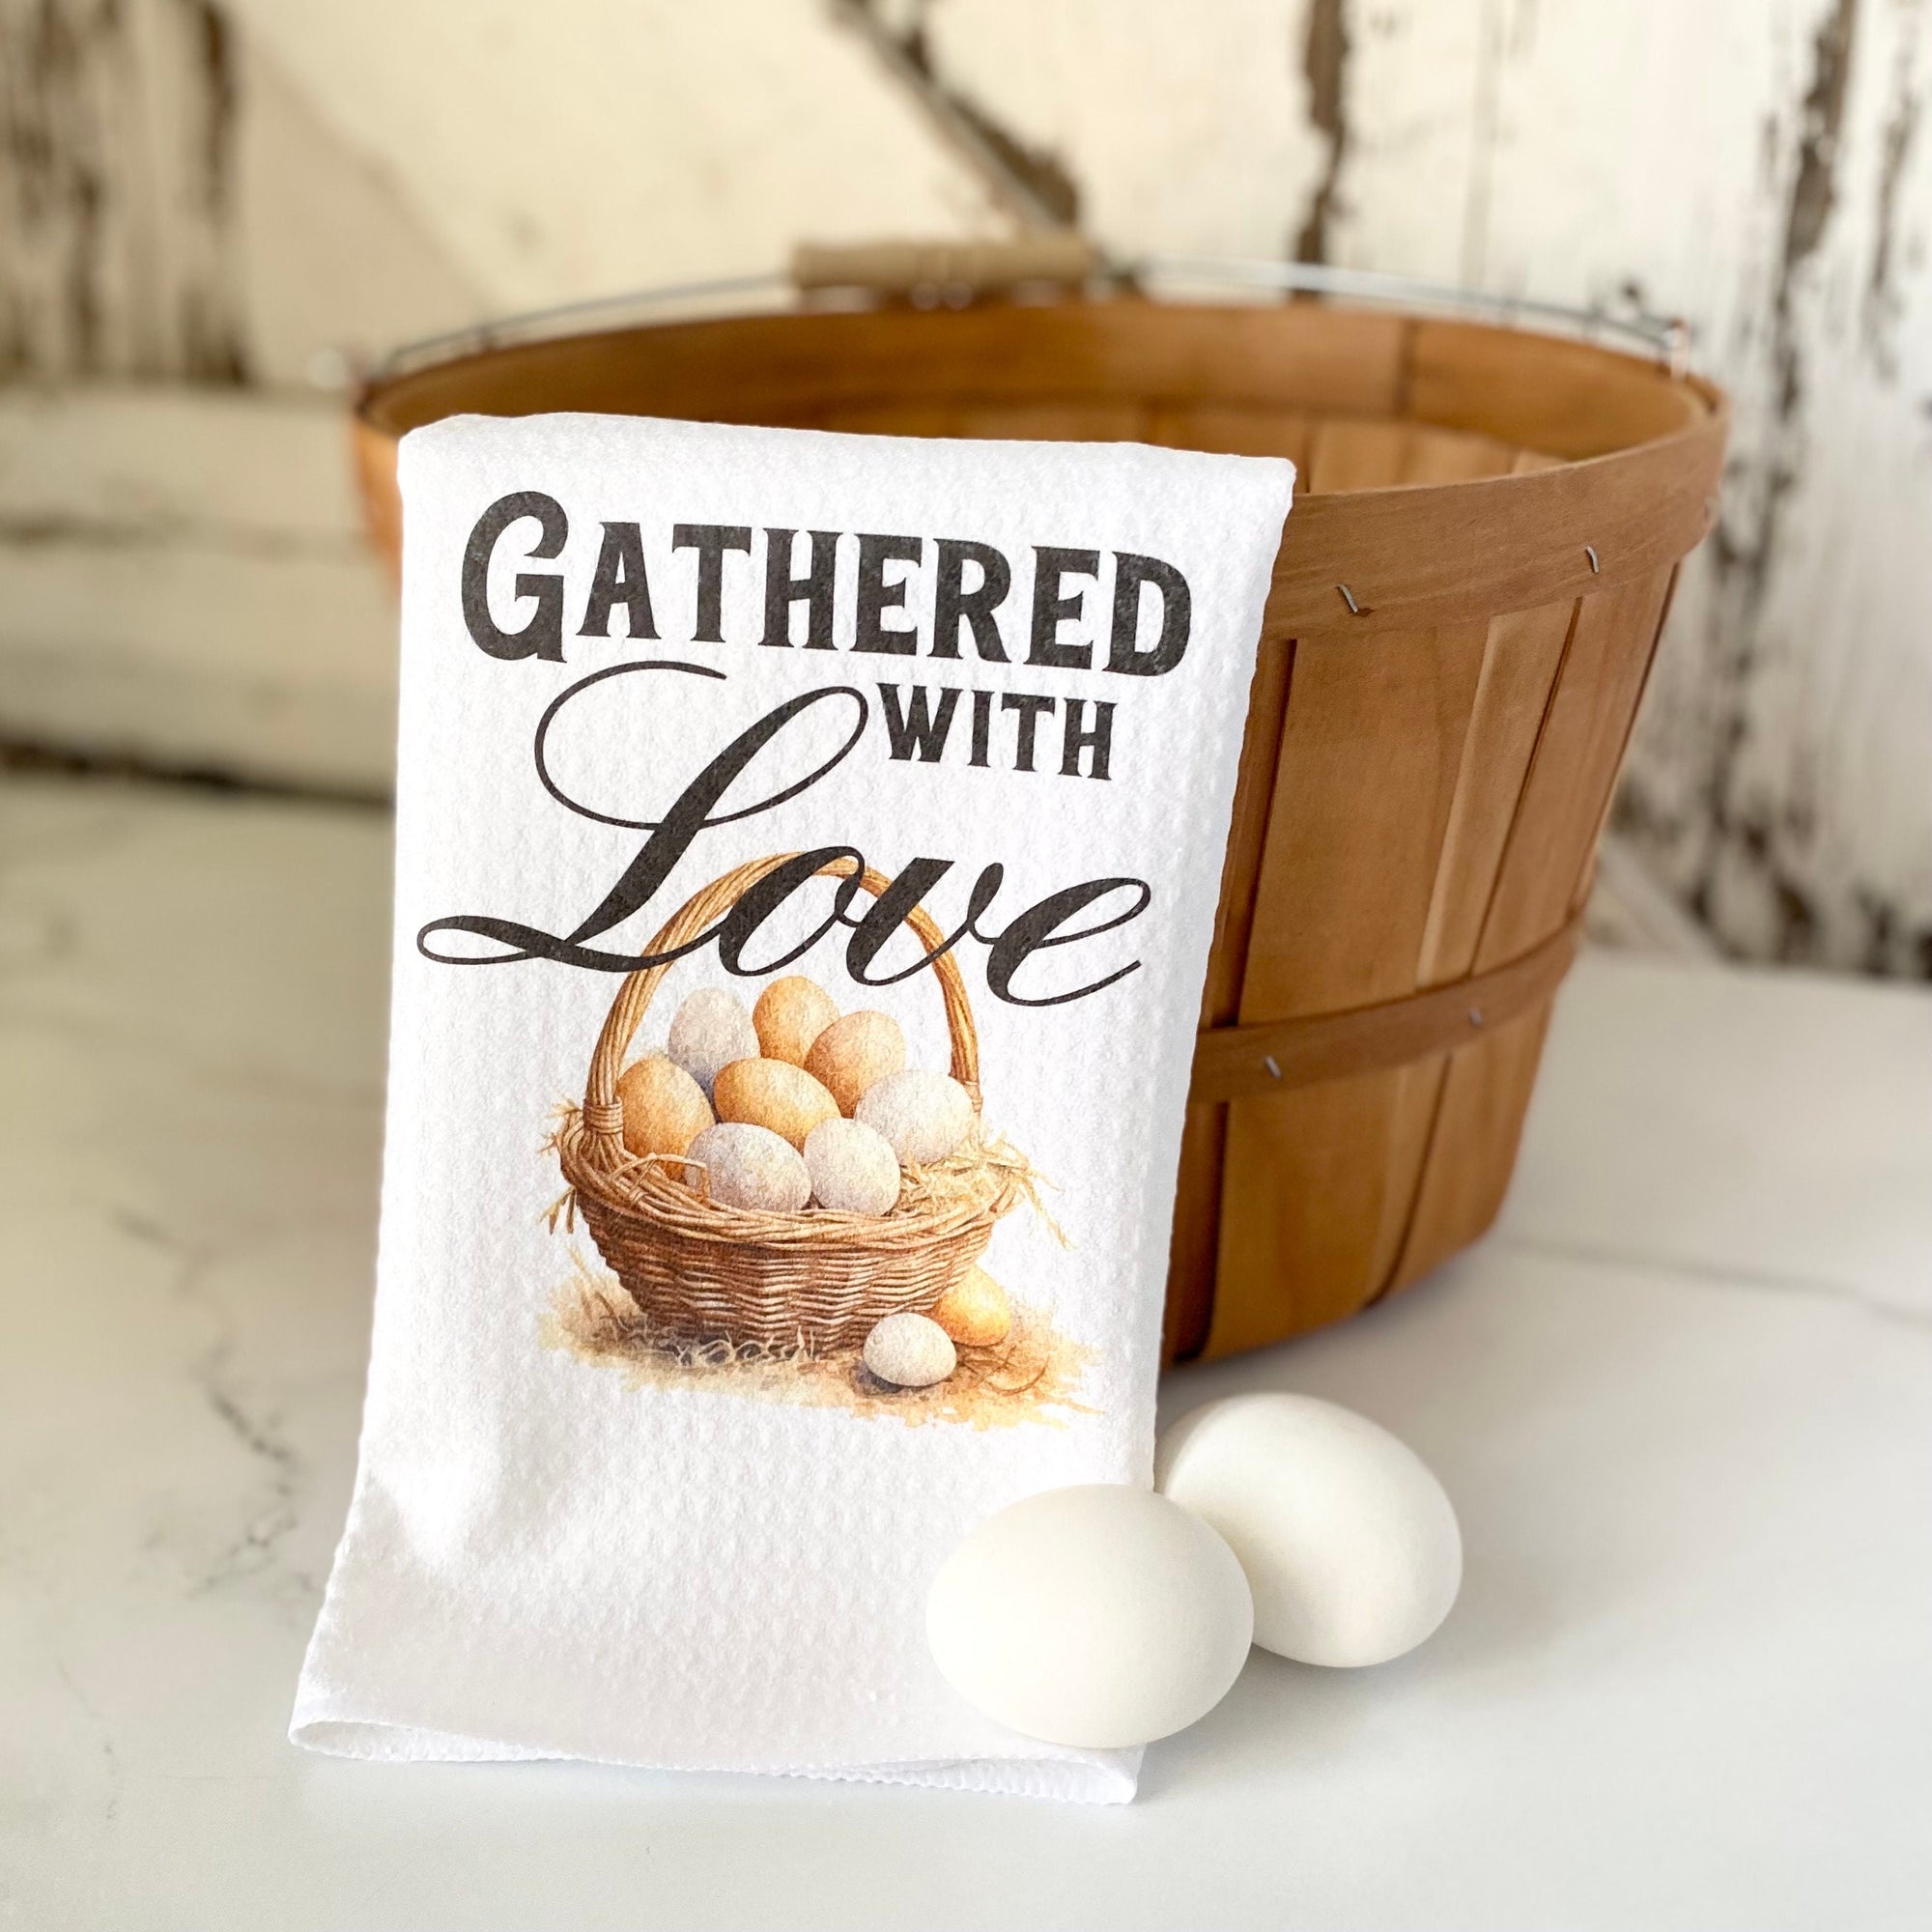 Gathered With Love Dish Towel- Waffle Woven Microfiber Tea Towel- Chicken Friend Gift